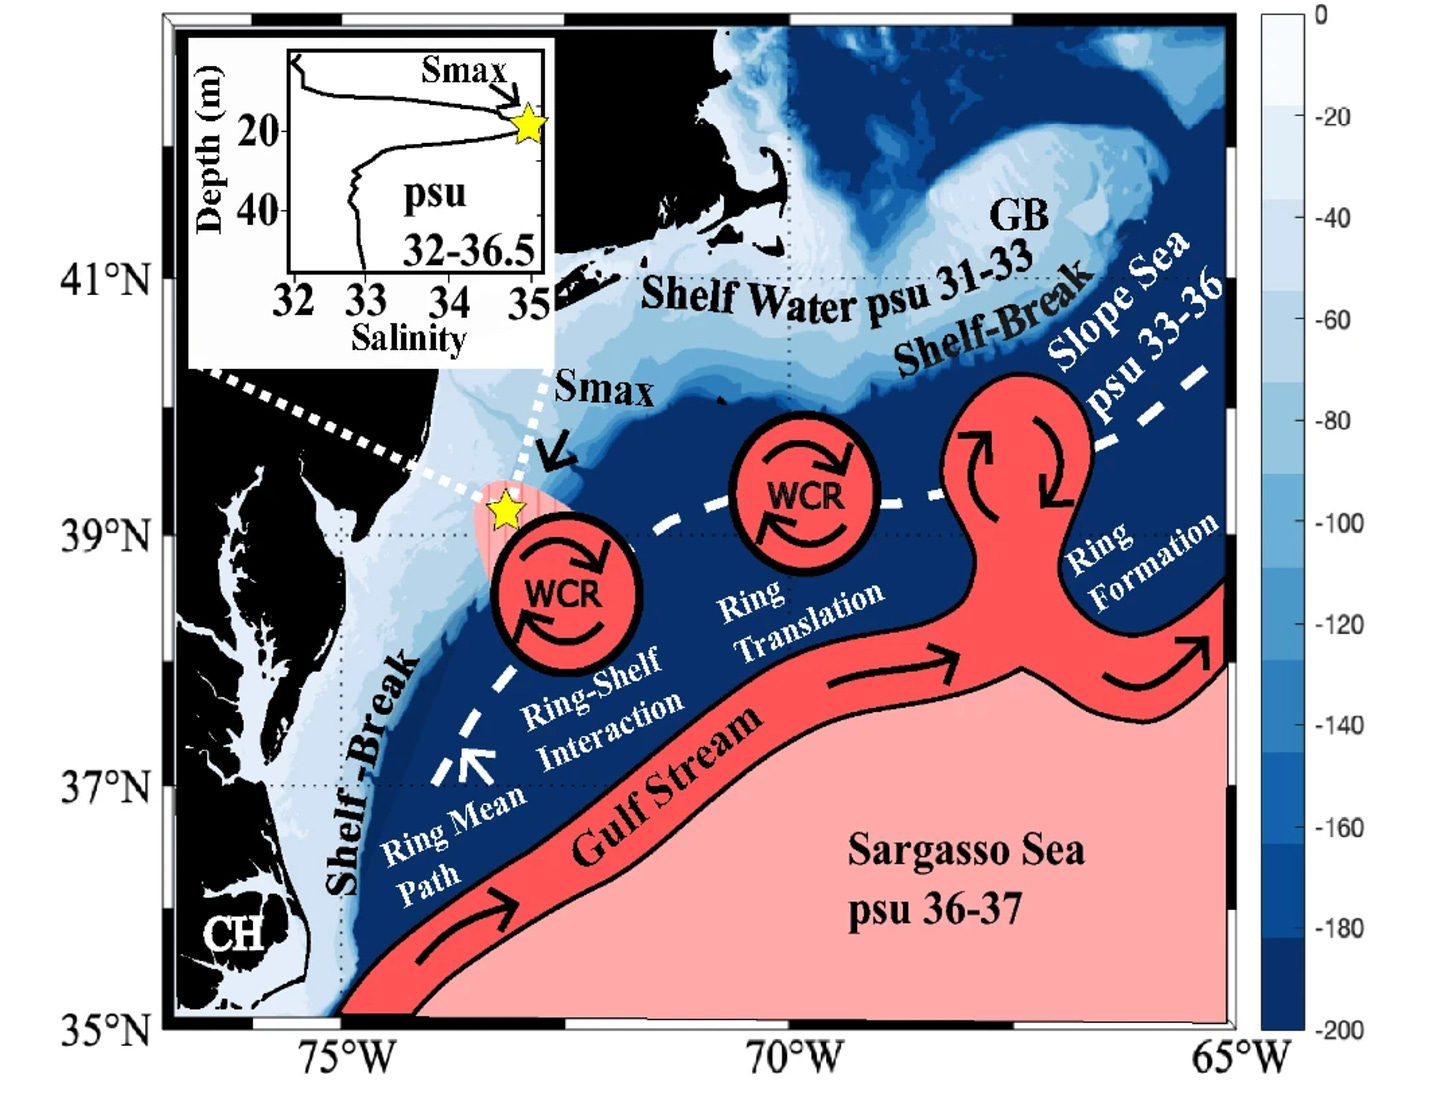 a map of the northwest atlantic from north carolina to cape cod. it shows the gulf stream in red, with clockwise-moving circles labeled "WCR" or warm-core ring. south of the gulf stream is the sargasso sea, in pink. in the top left corner, there's a little graph of salinity versus depth, showing a peak in salinity on the continental shelf near cape may, new jersey.